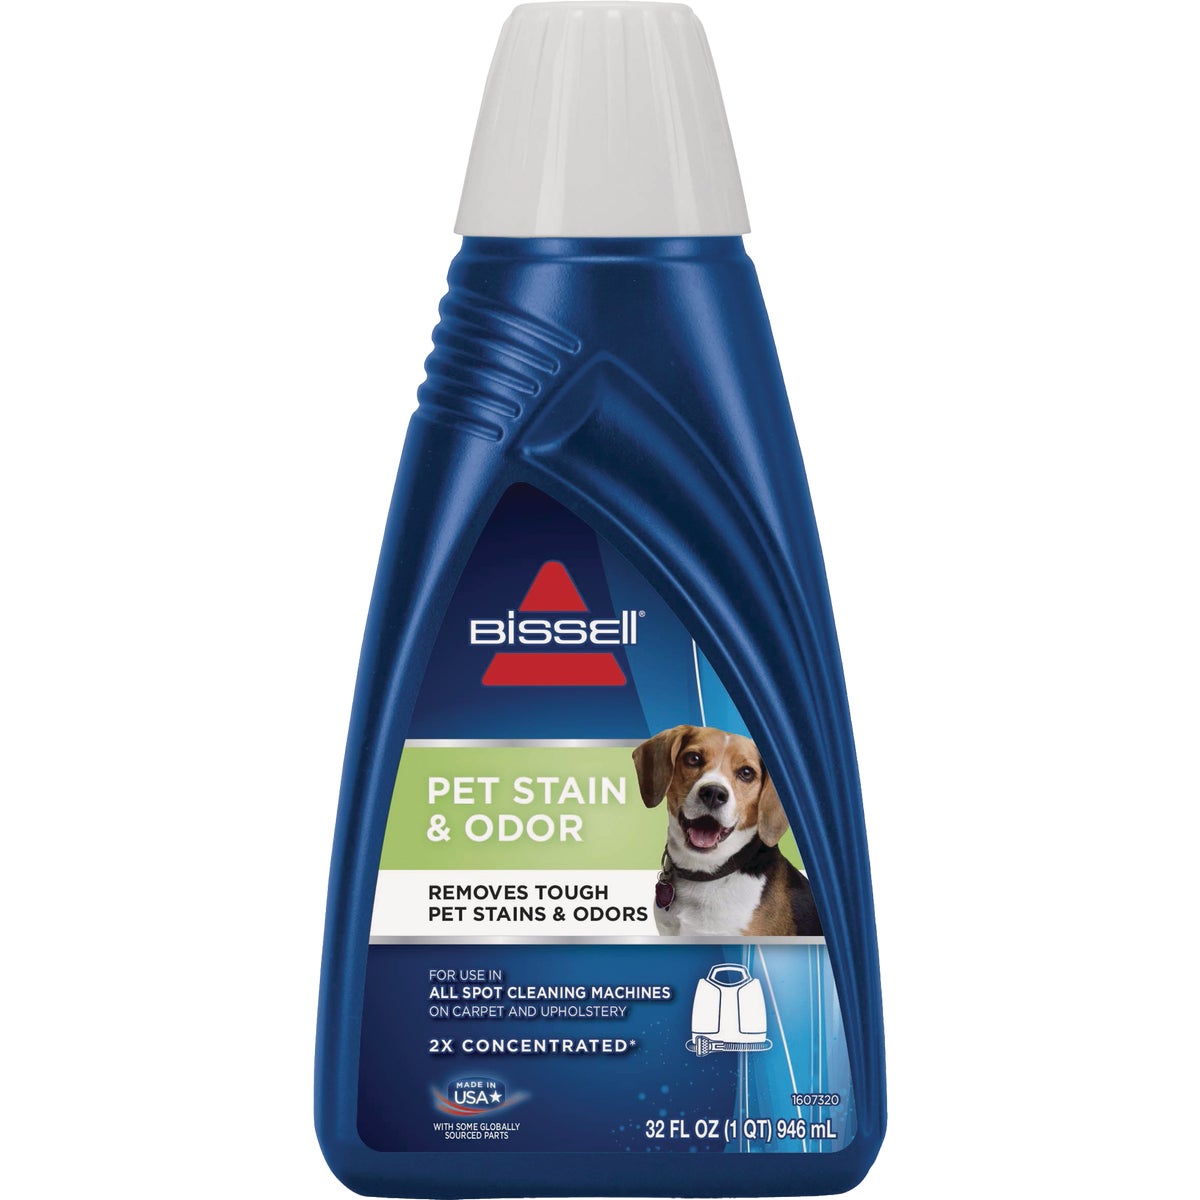 Bissell 32 Oz. Pet Stain & Odor Remover Carpet Cleaner